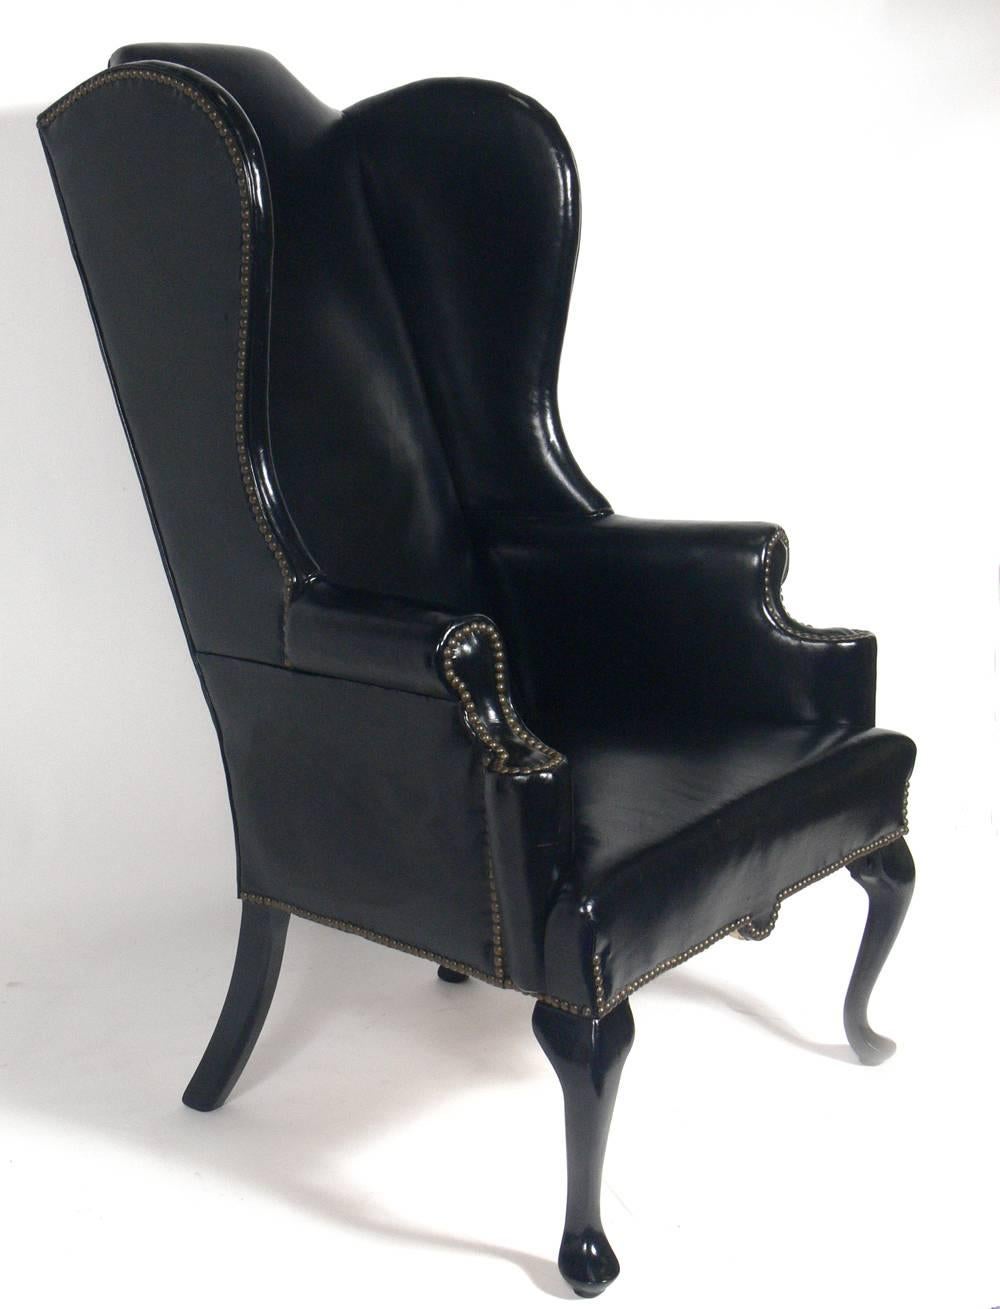 Perfectly patinated black leather wing back lounge chair, American, circa 1950s. The original black leather upholstery is perfectly broken in, with overall aged patina. The brass nailhead trim also exhibits wonderful patina. The wooden legs have